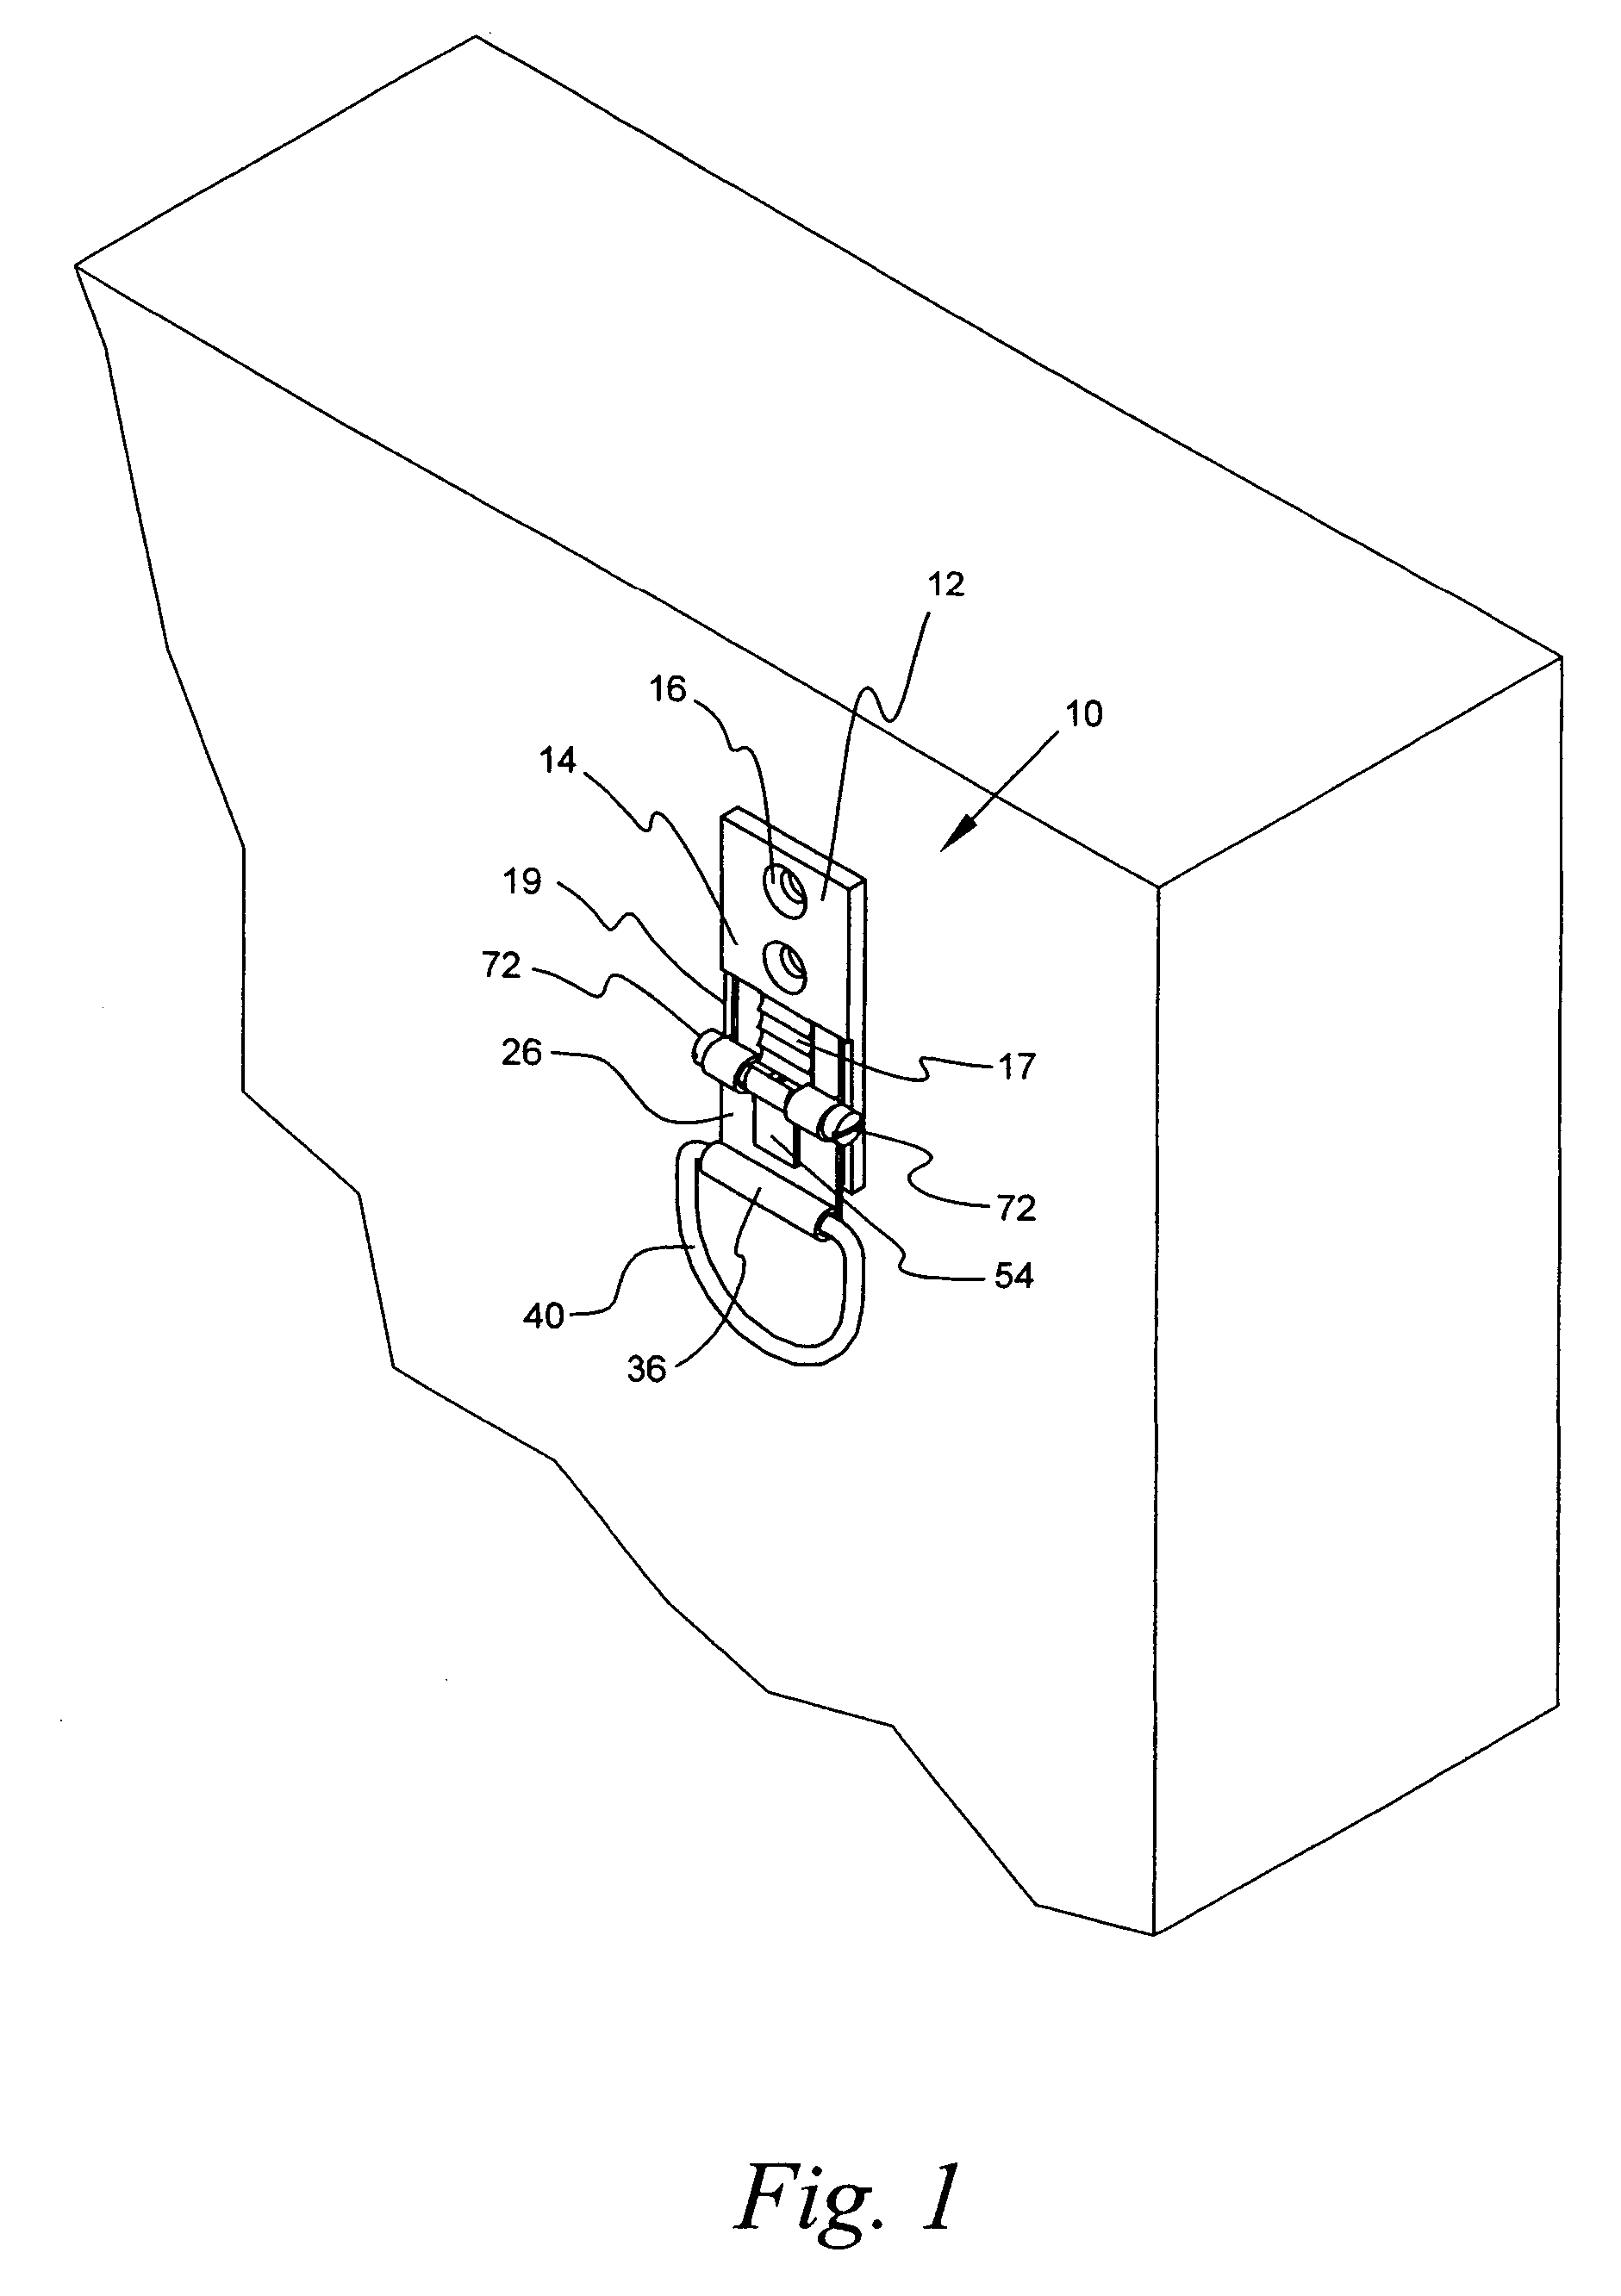 Device for supporting and vertically adjusting the position of an object upon a support structure